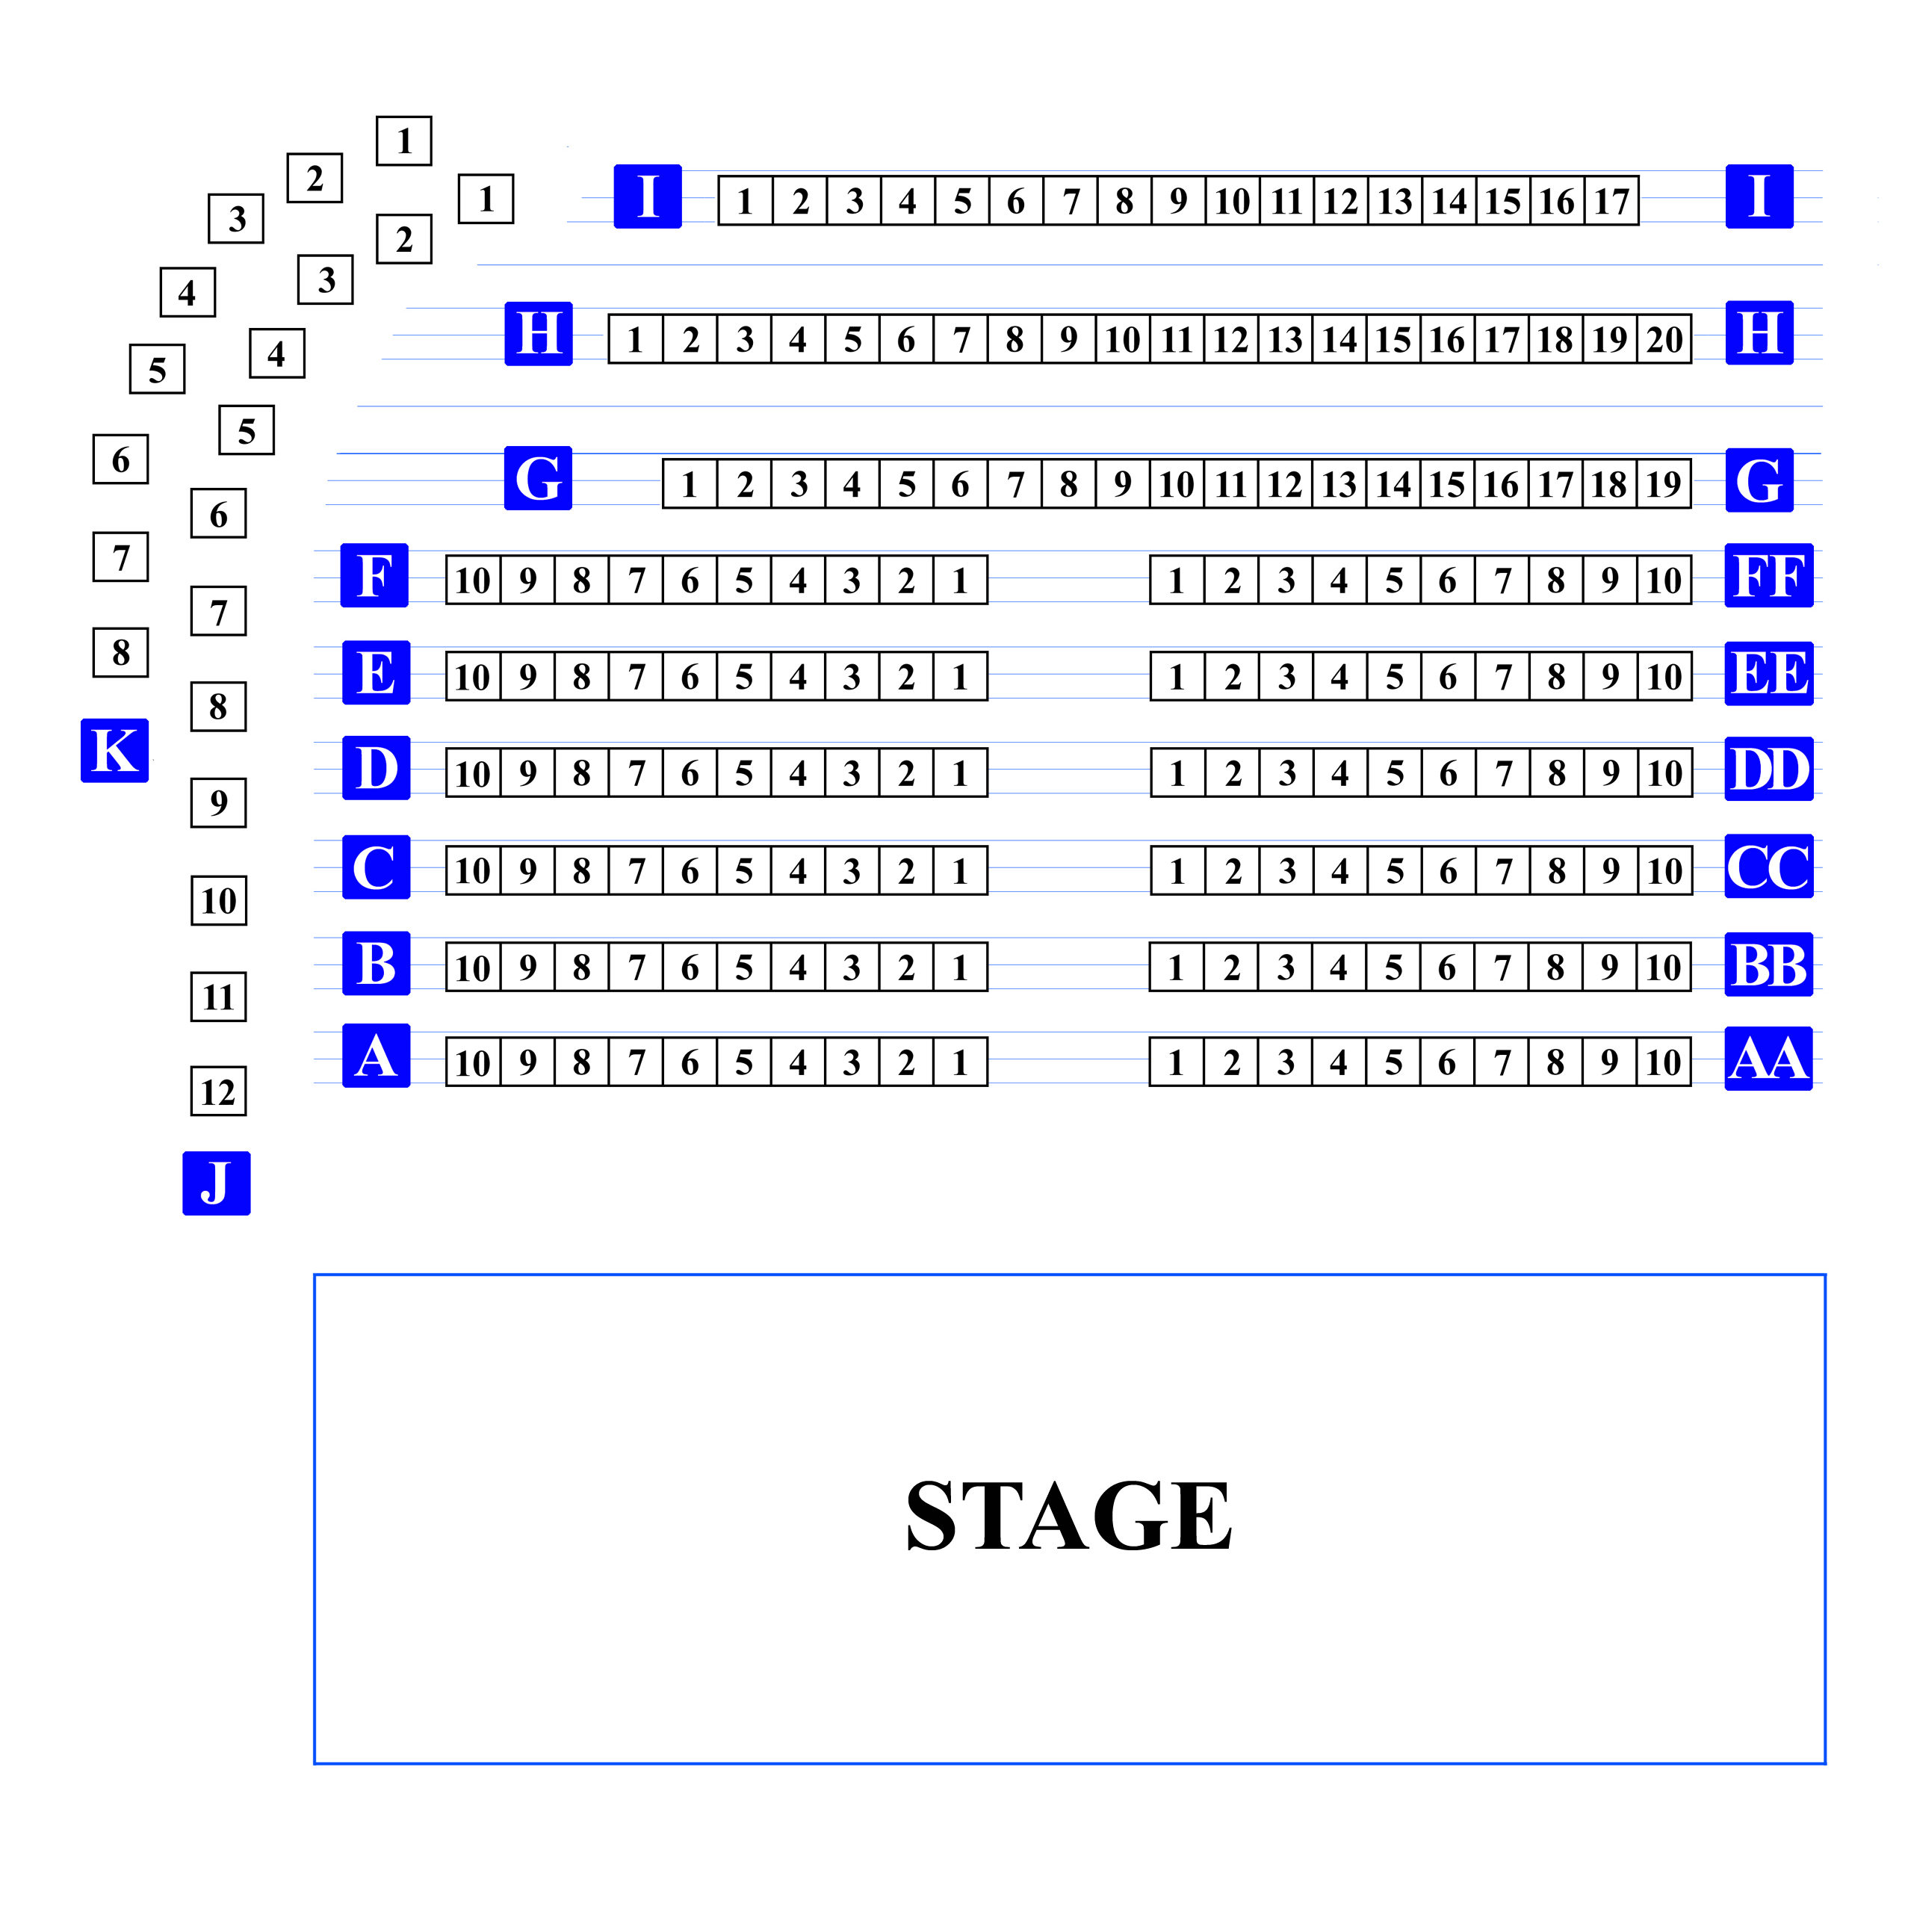 Edgefield Concerts Seating Chart